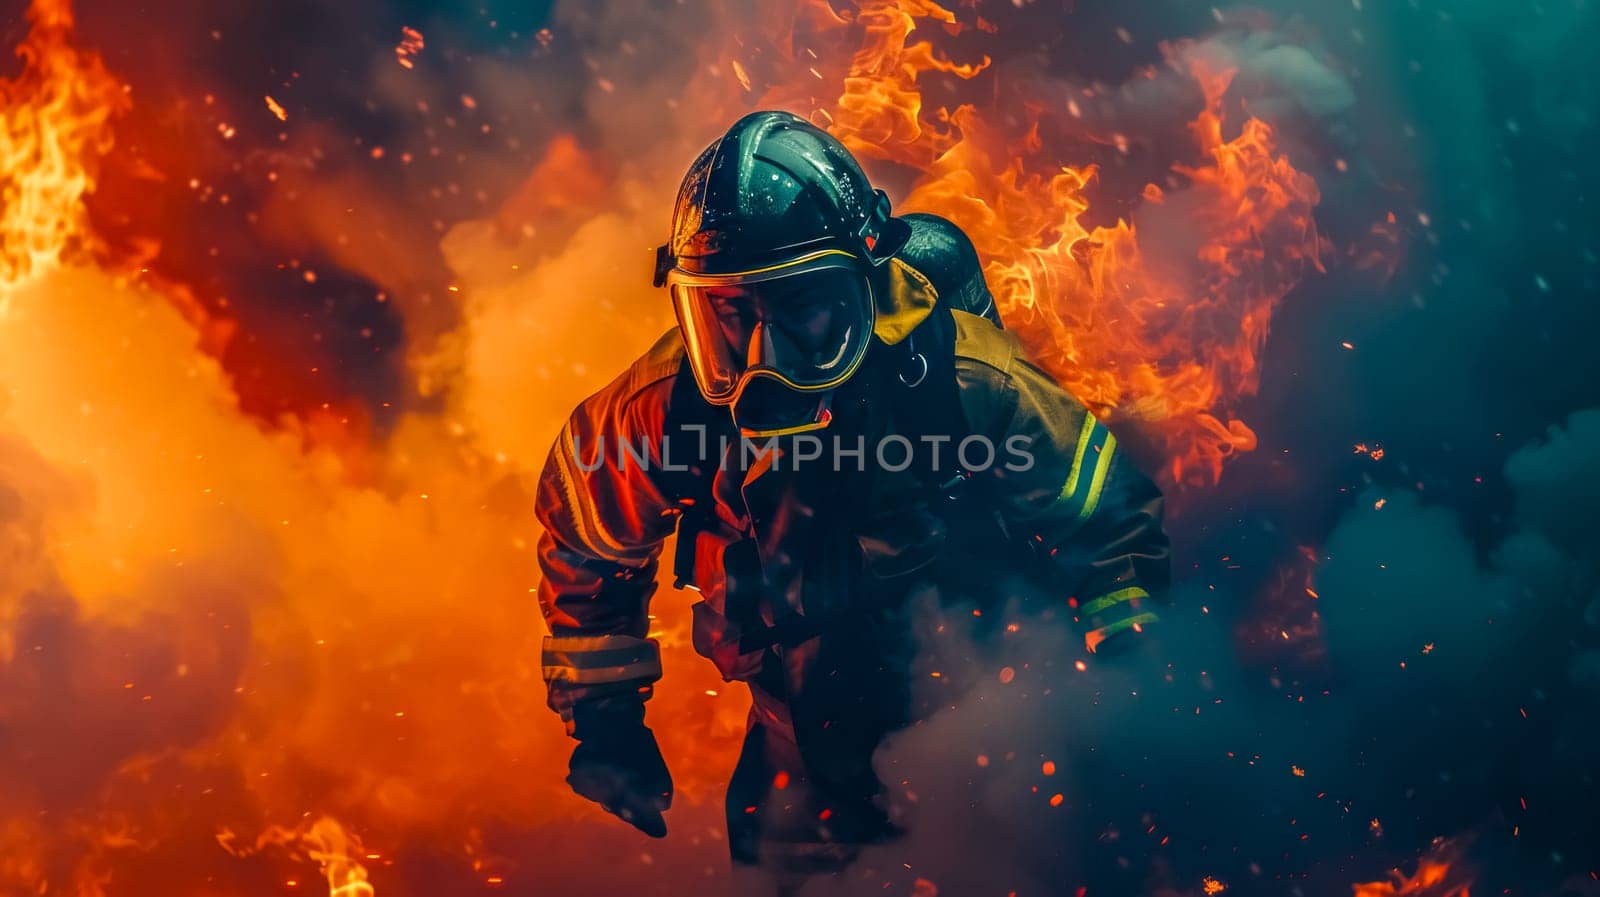 Brave firefighter in action amidst intense flames by Edophoto